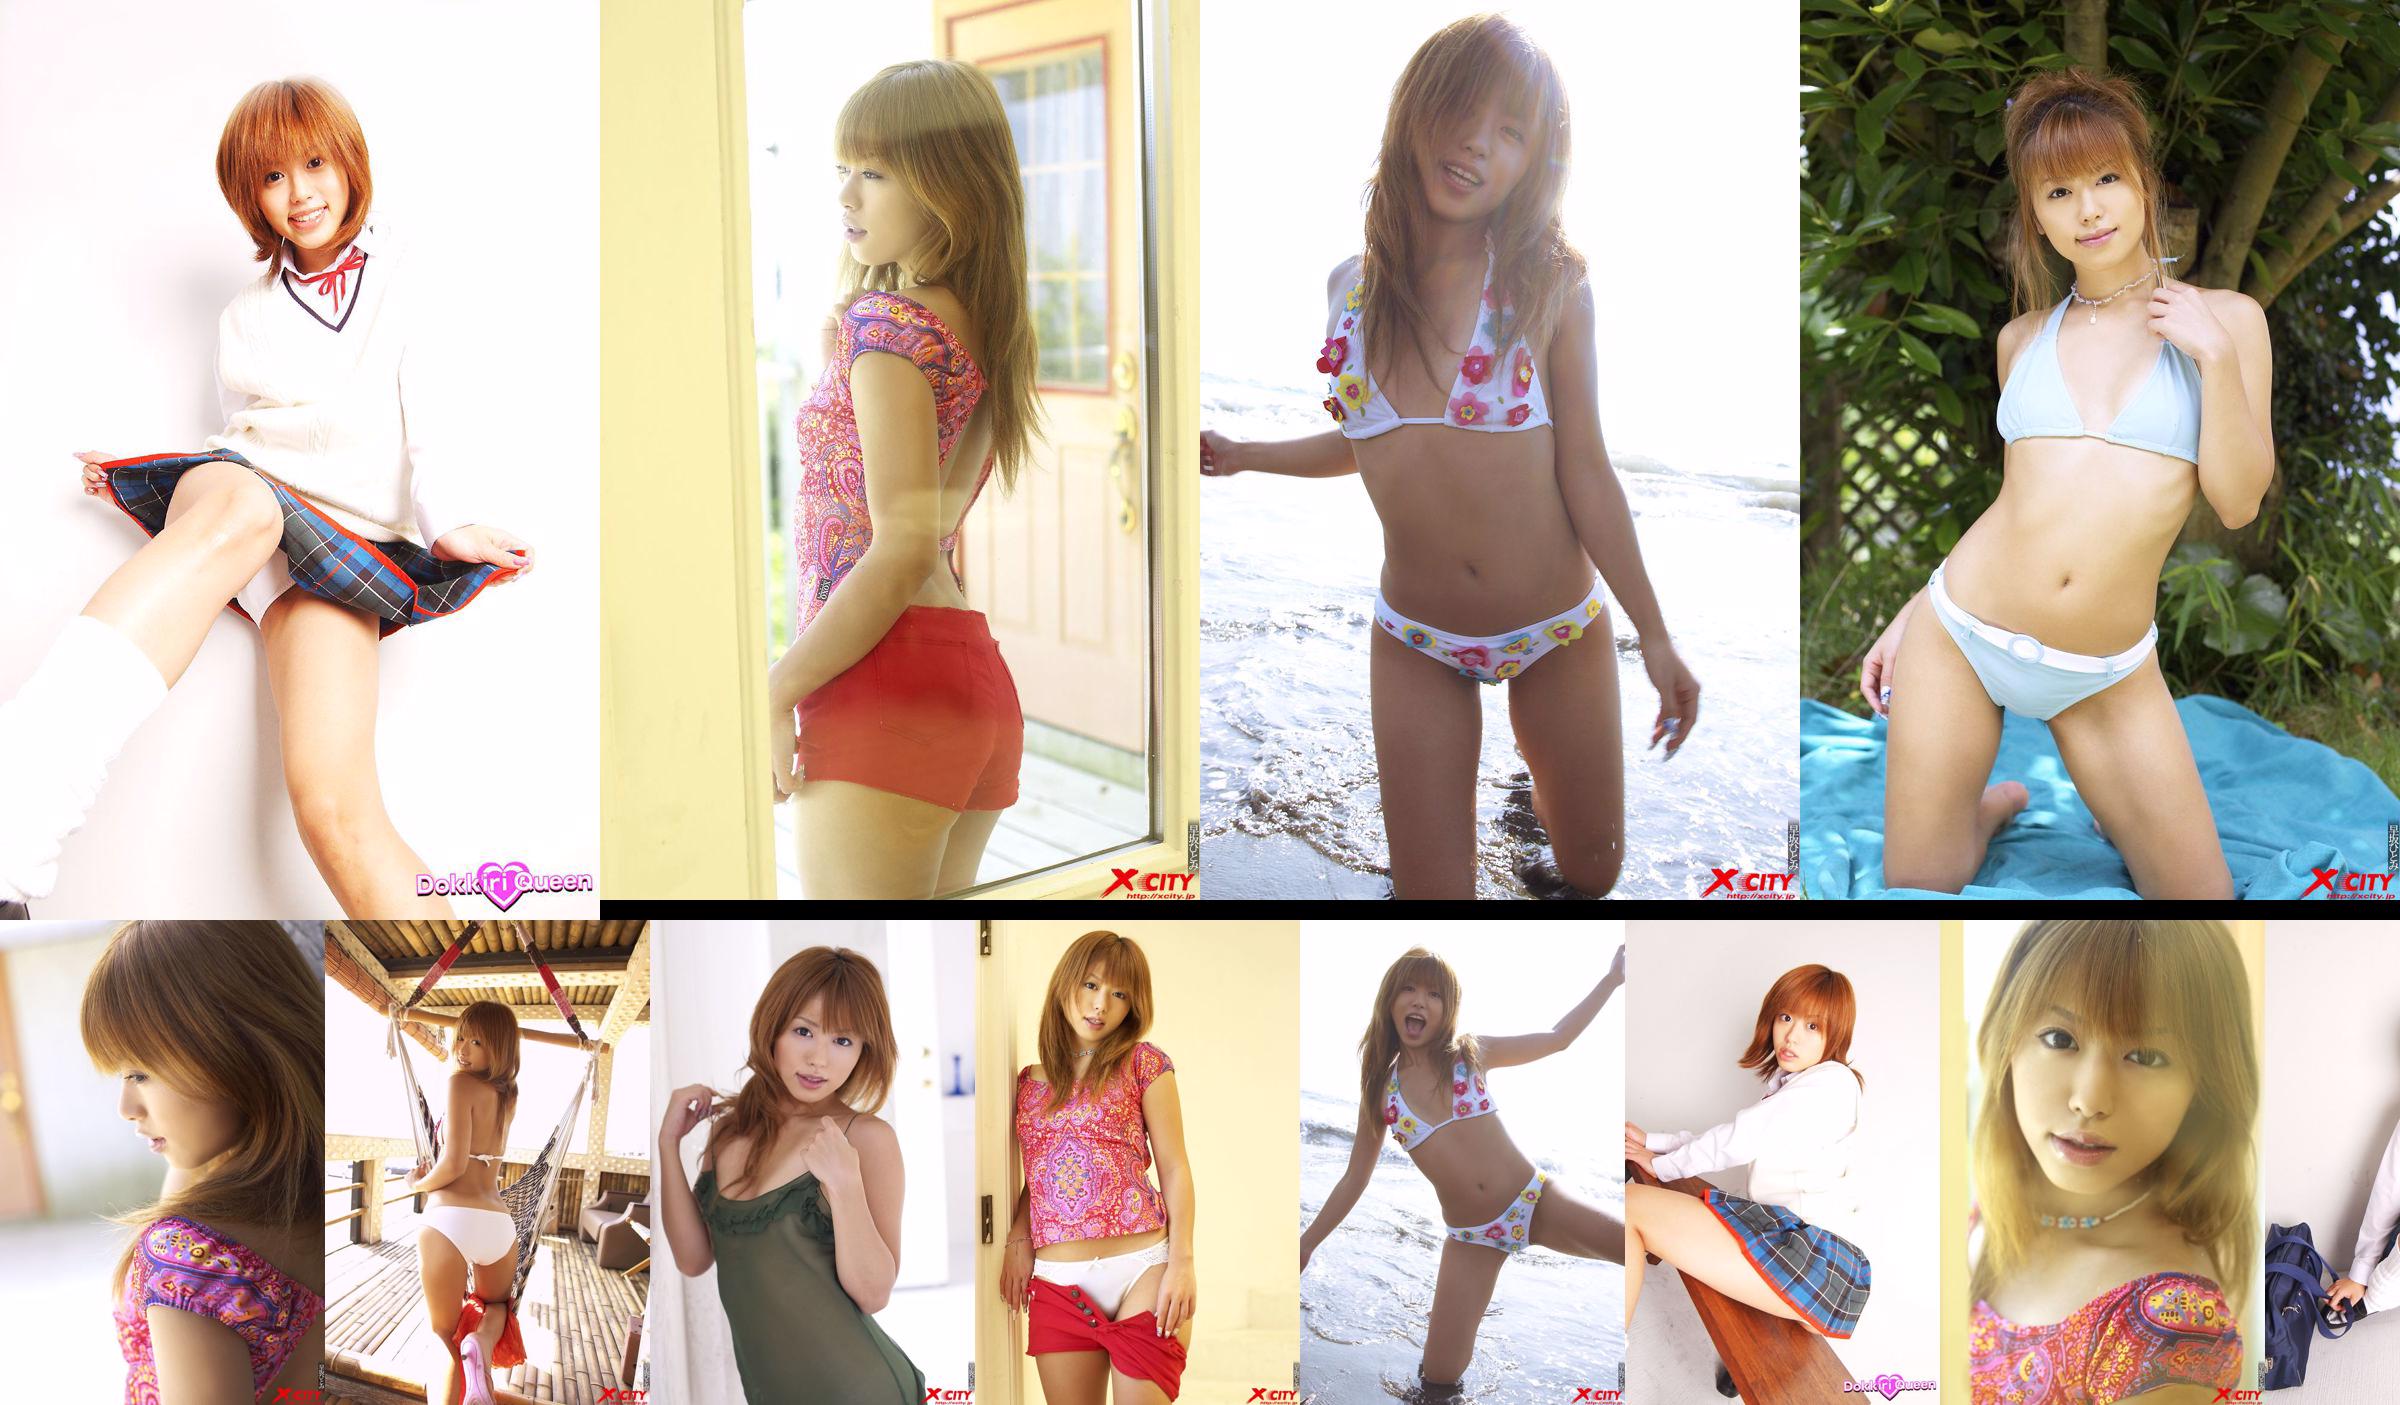 Shiina れ い か "Sprinkled Jewel" [Graphis] Gals No.e63cba Page 24